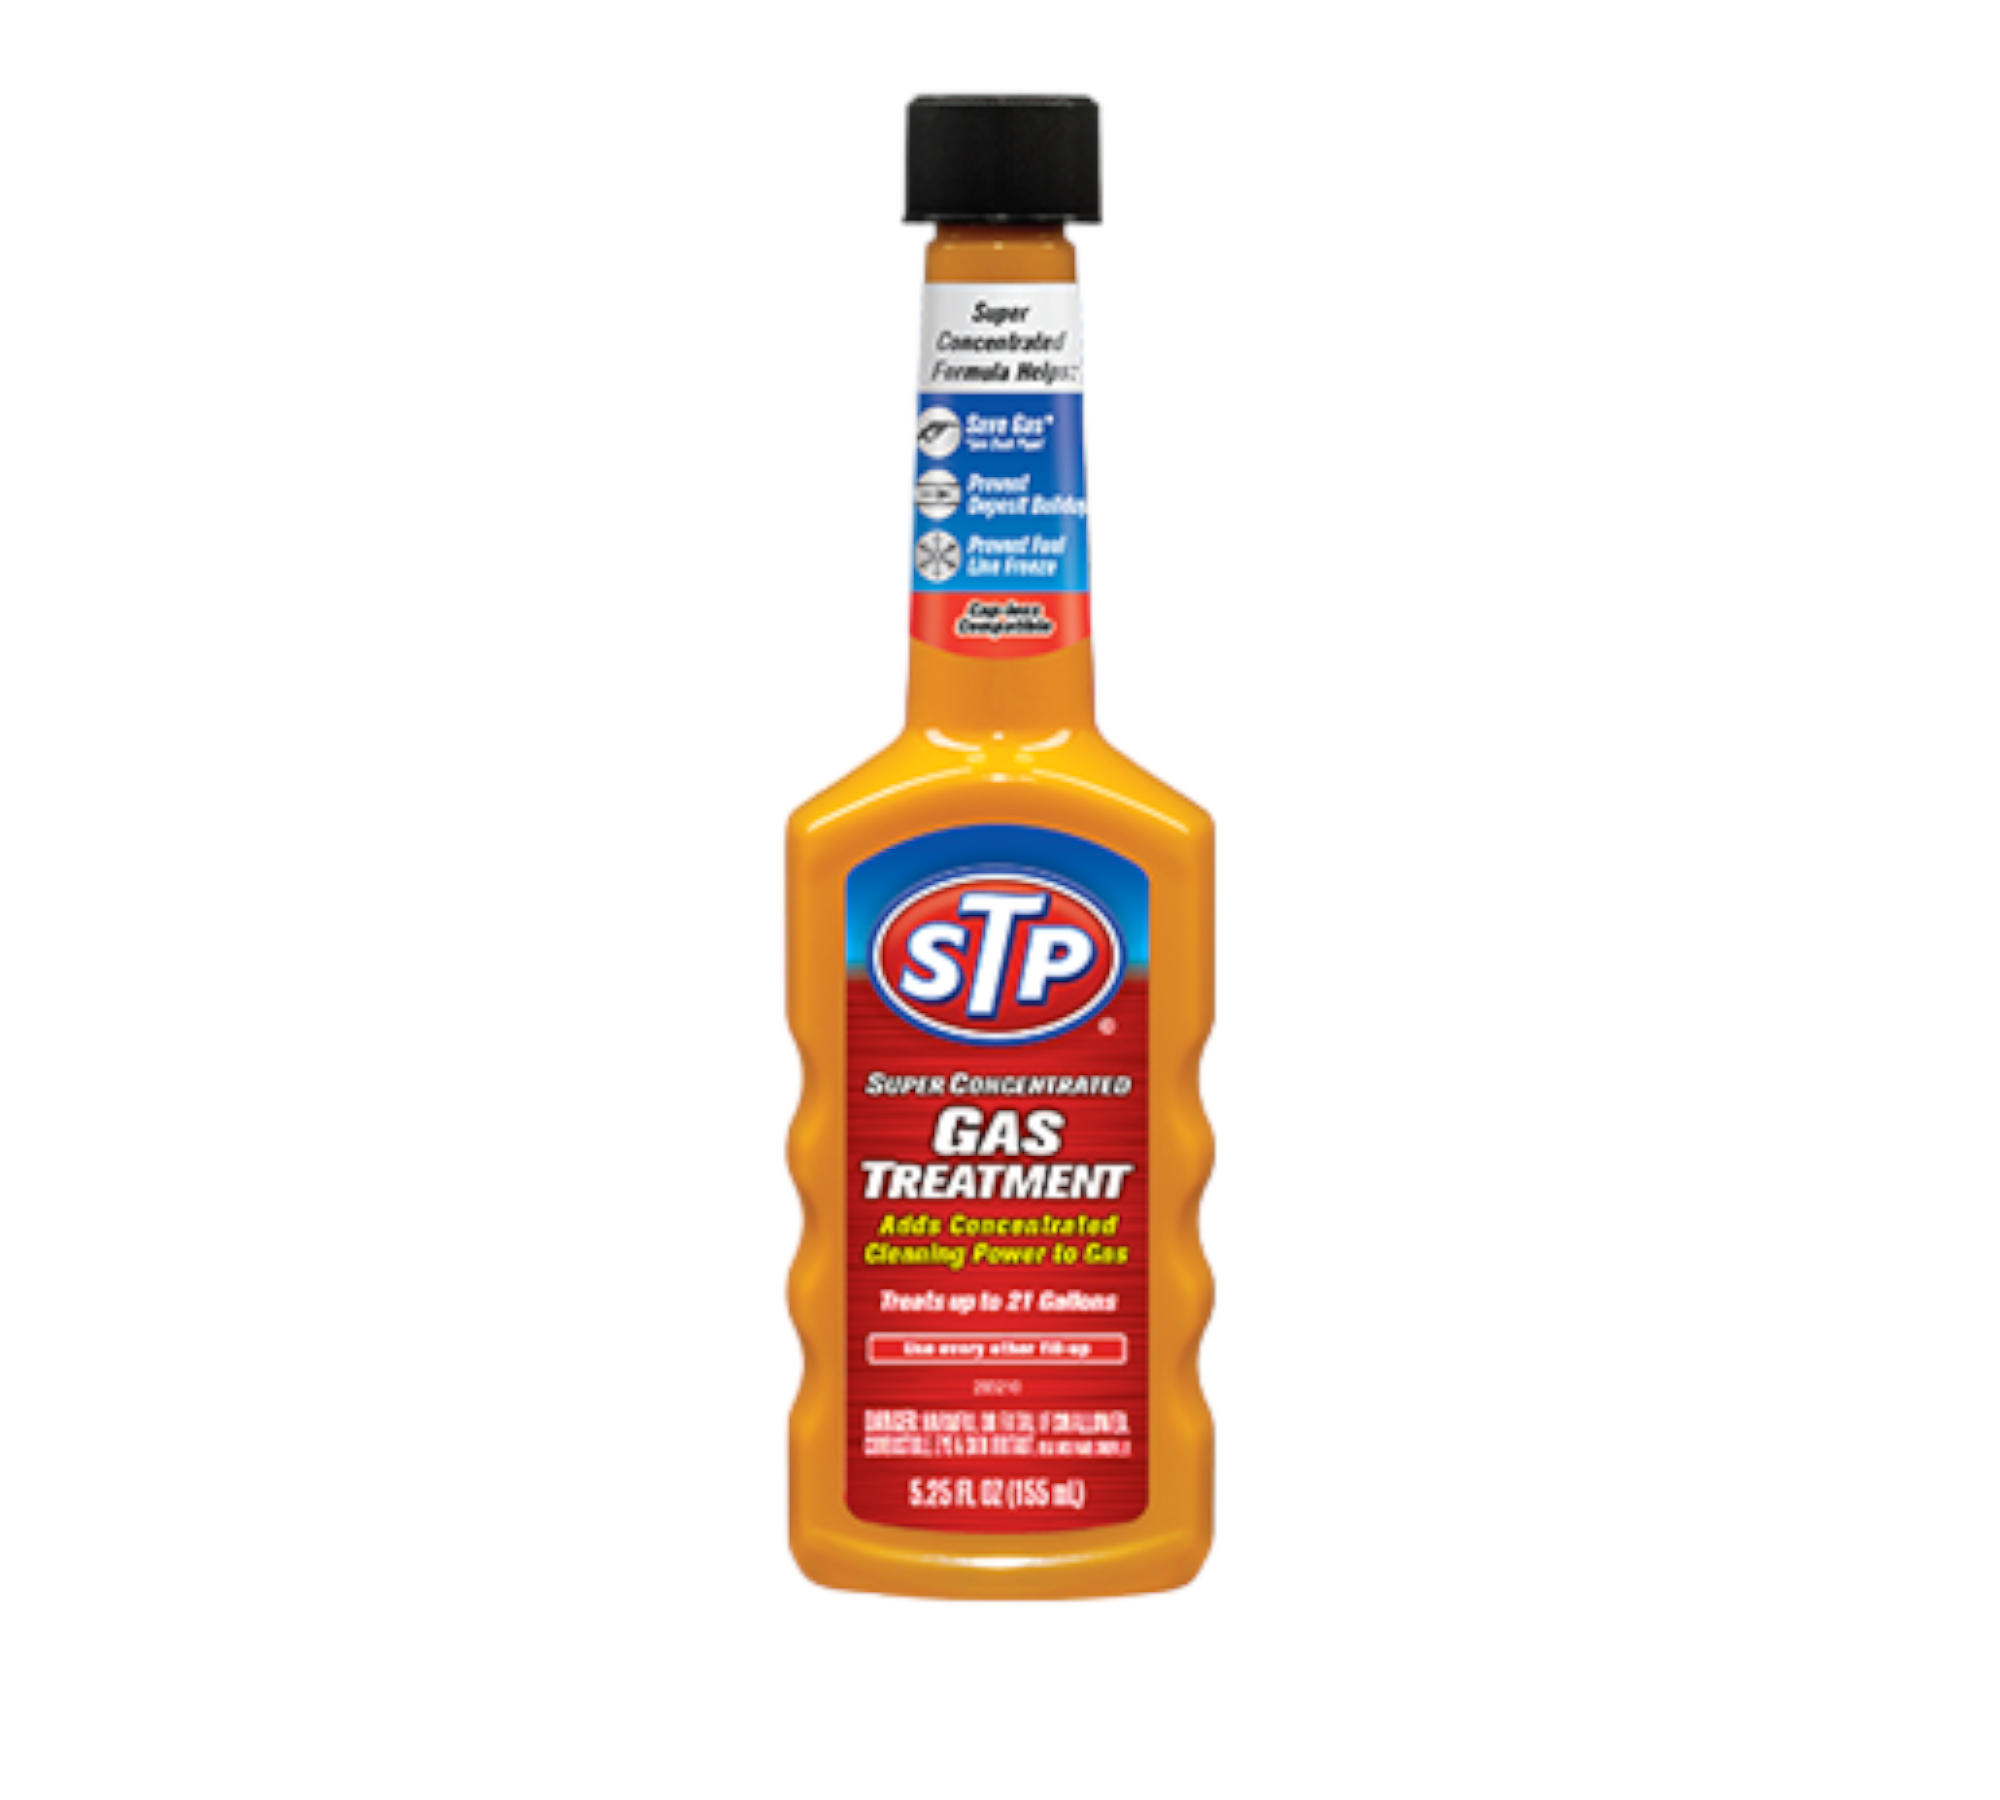 STP Super Concentrated Gas Treatment (5.25oz./155 ML)